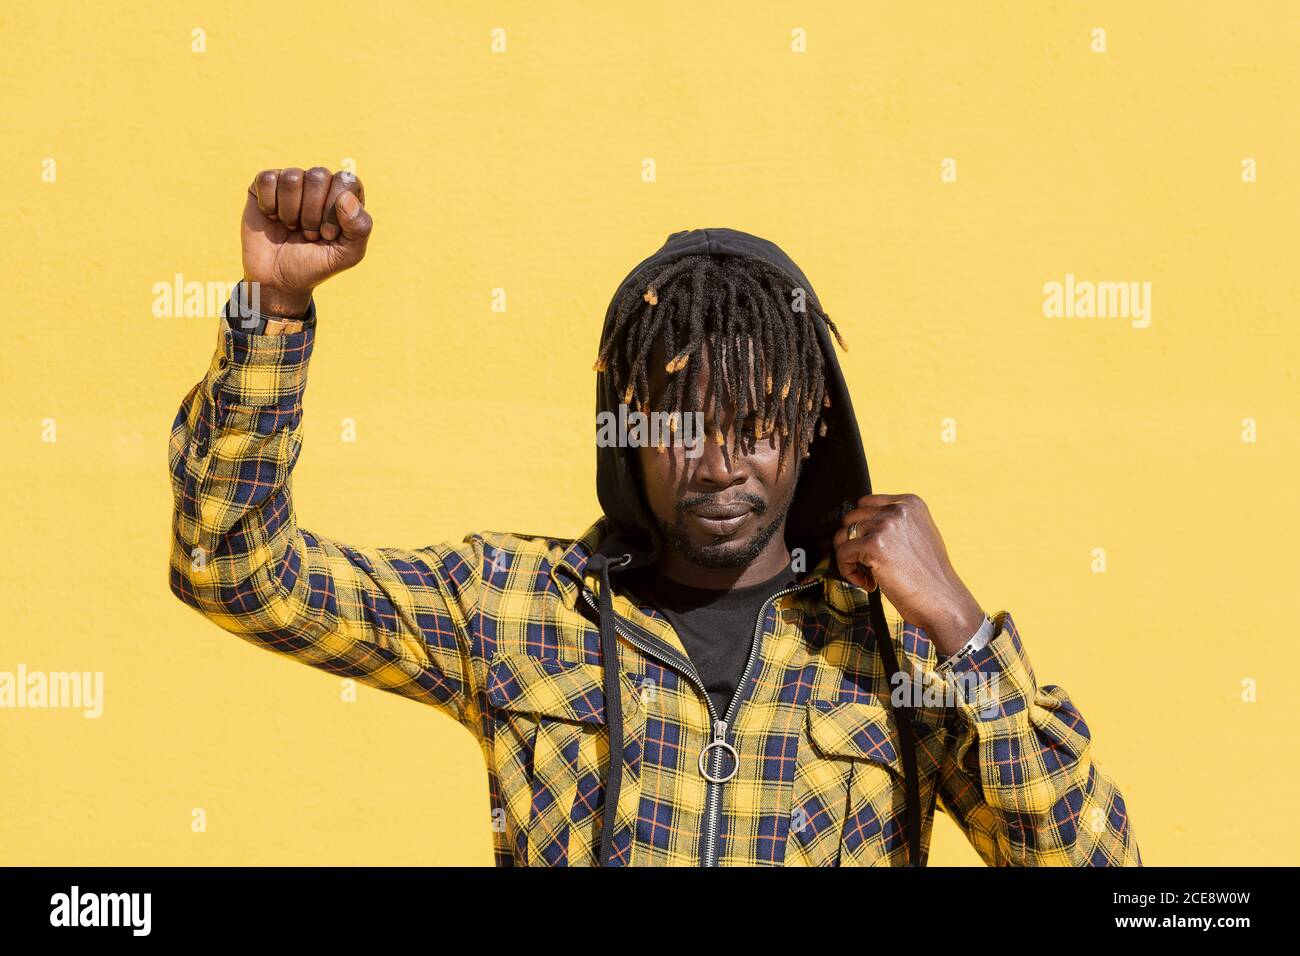 attractive young black man with raised fist and hood on an intense yellow background, concept of human rights struggle and lifestyle, copy space for text Stock Photo